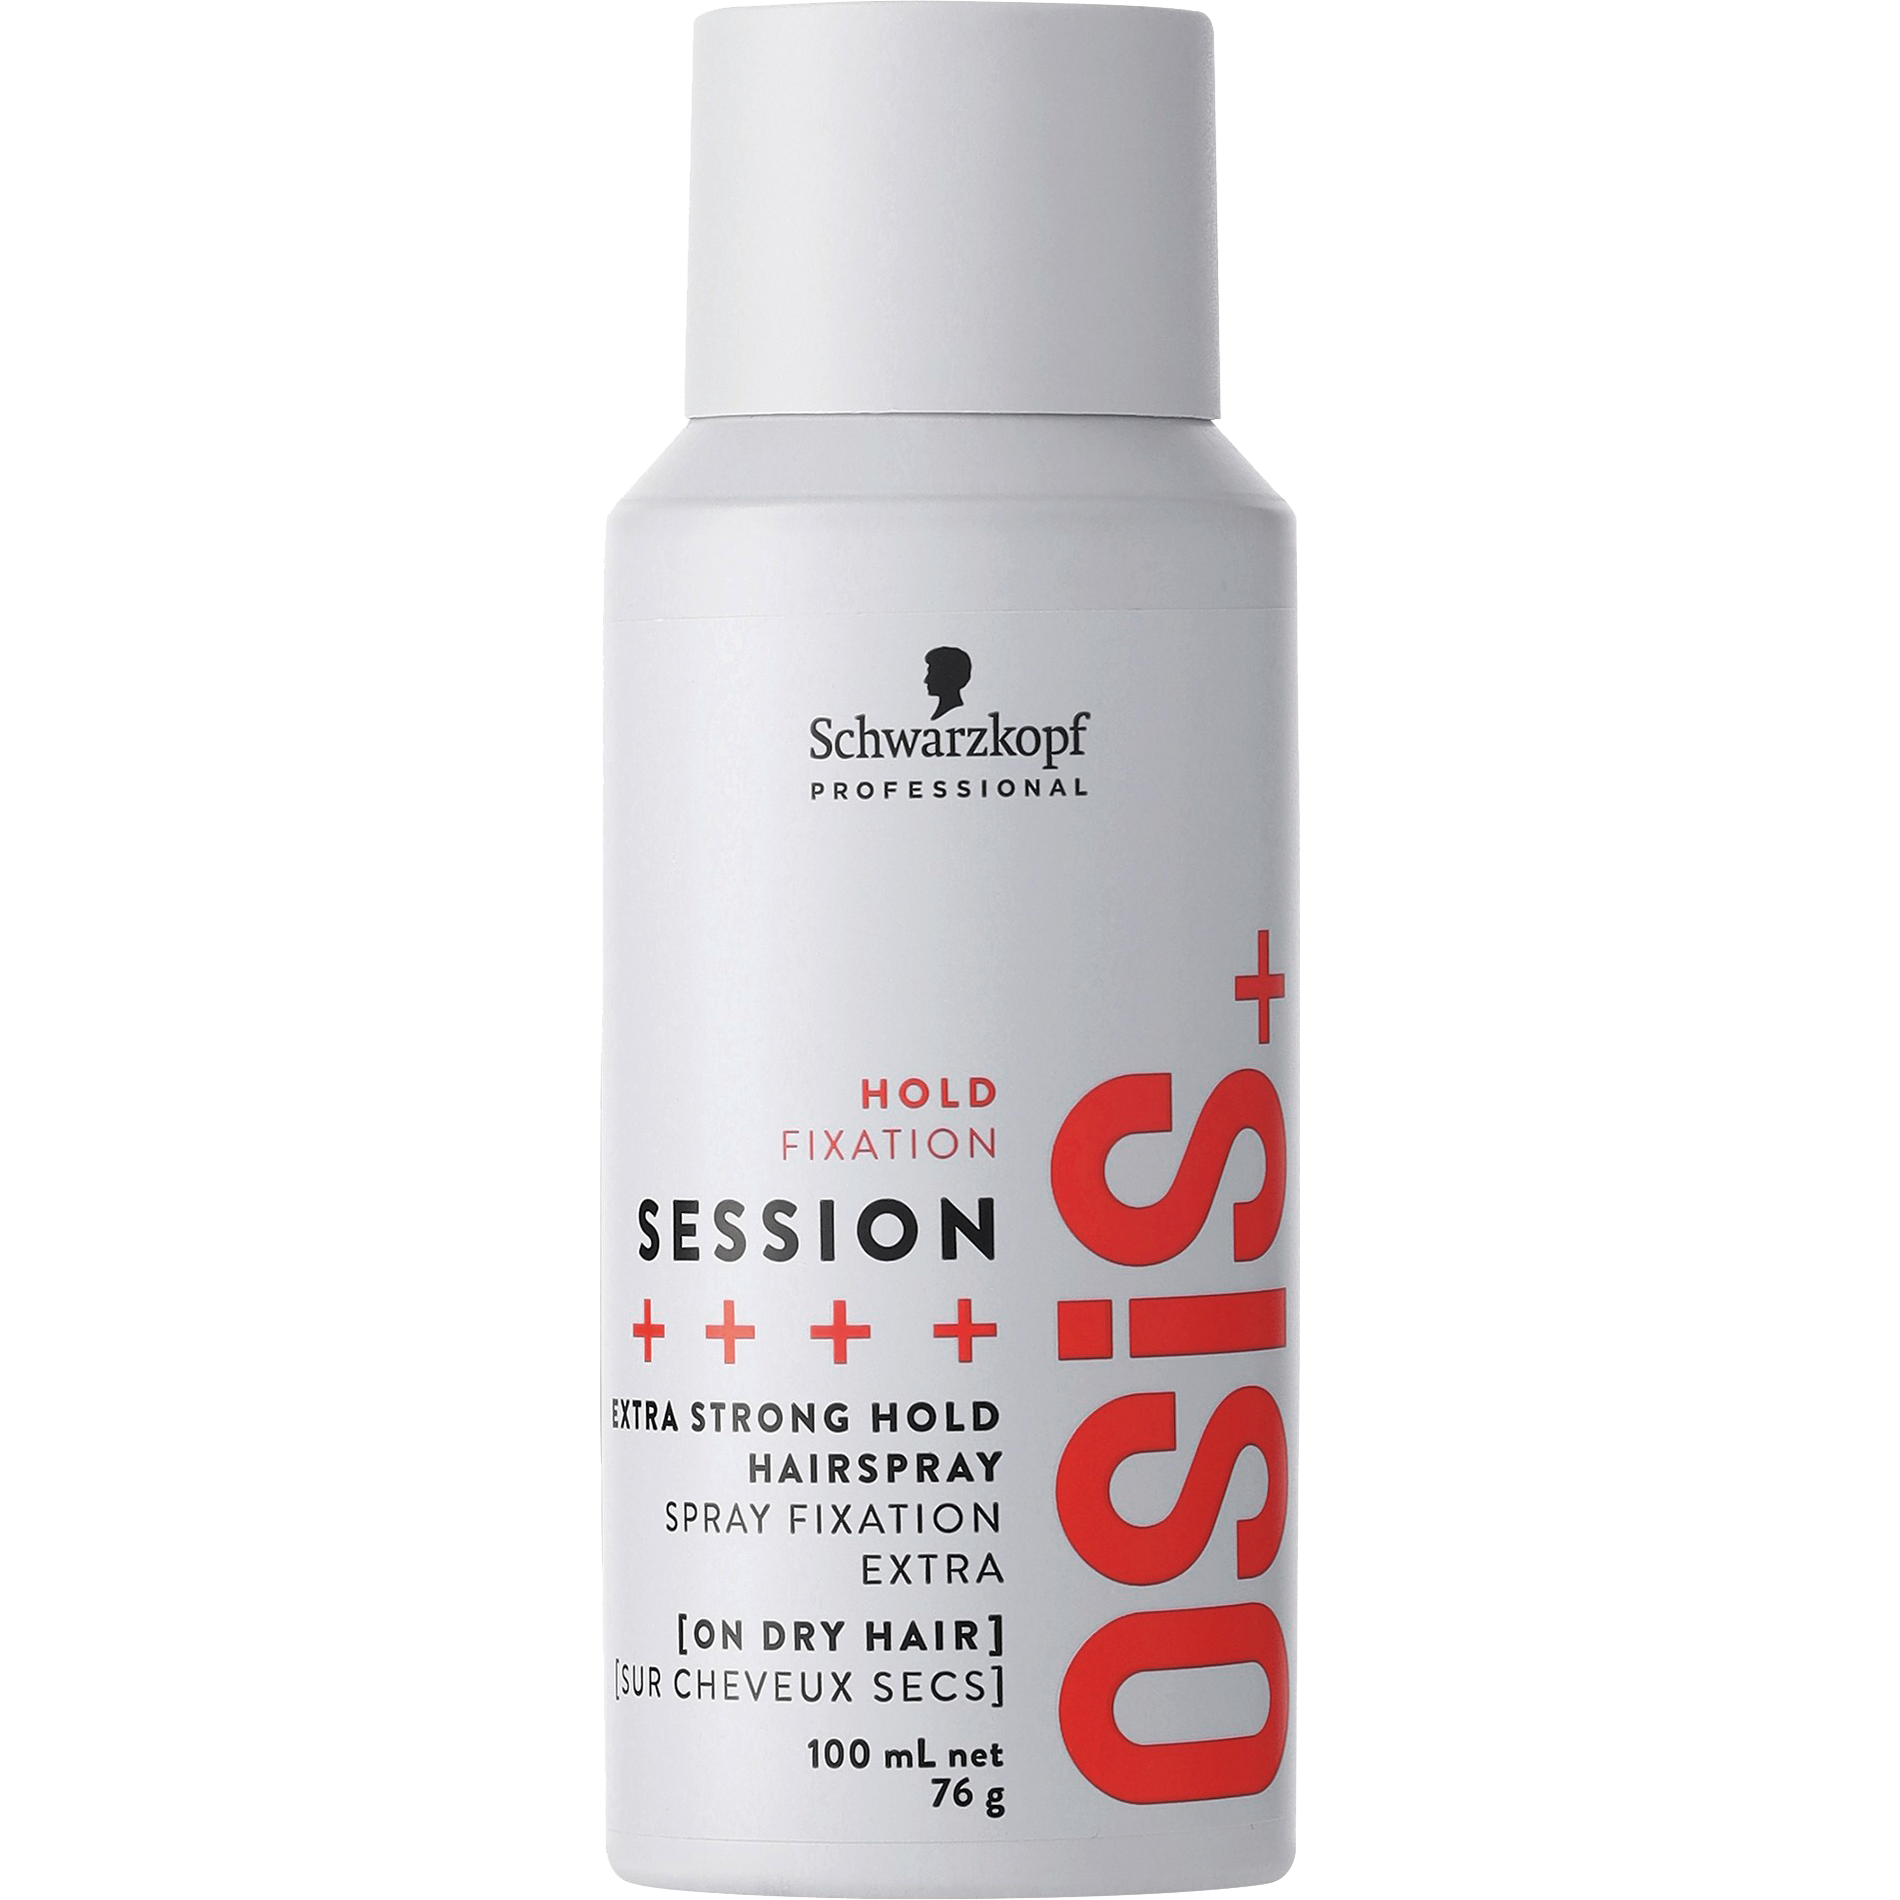 Schwarzkopf Professional Osis+ Hold Session 100 ml